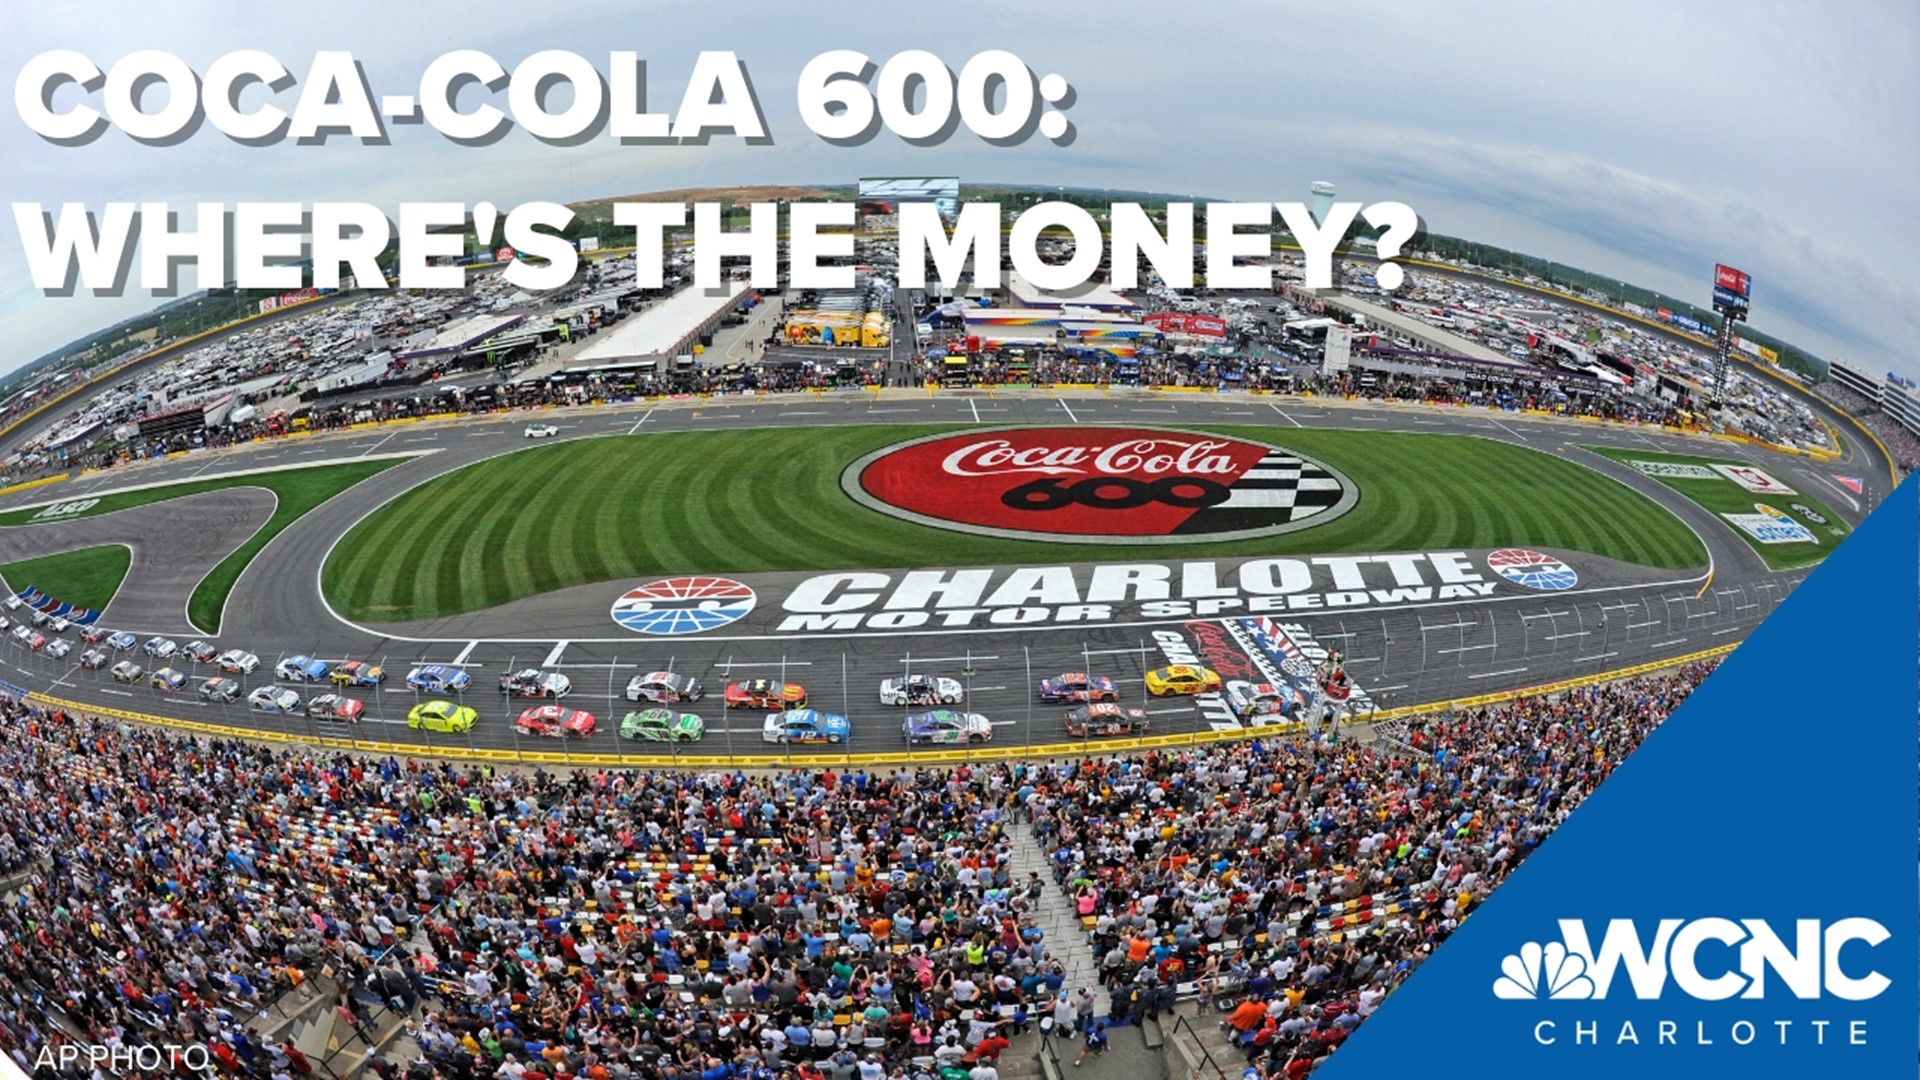 Businesses see crowds for Coca-Cola 600 but not as much money spent